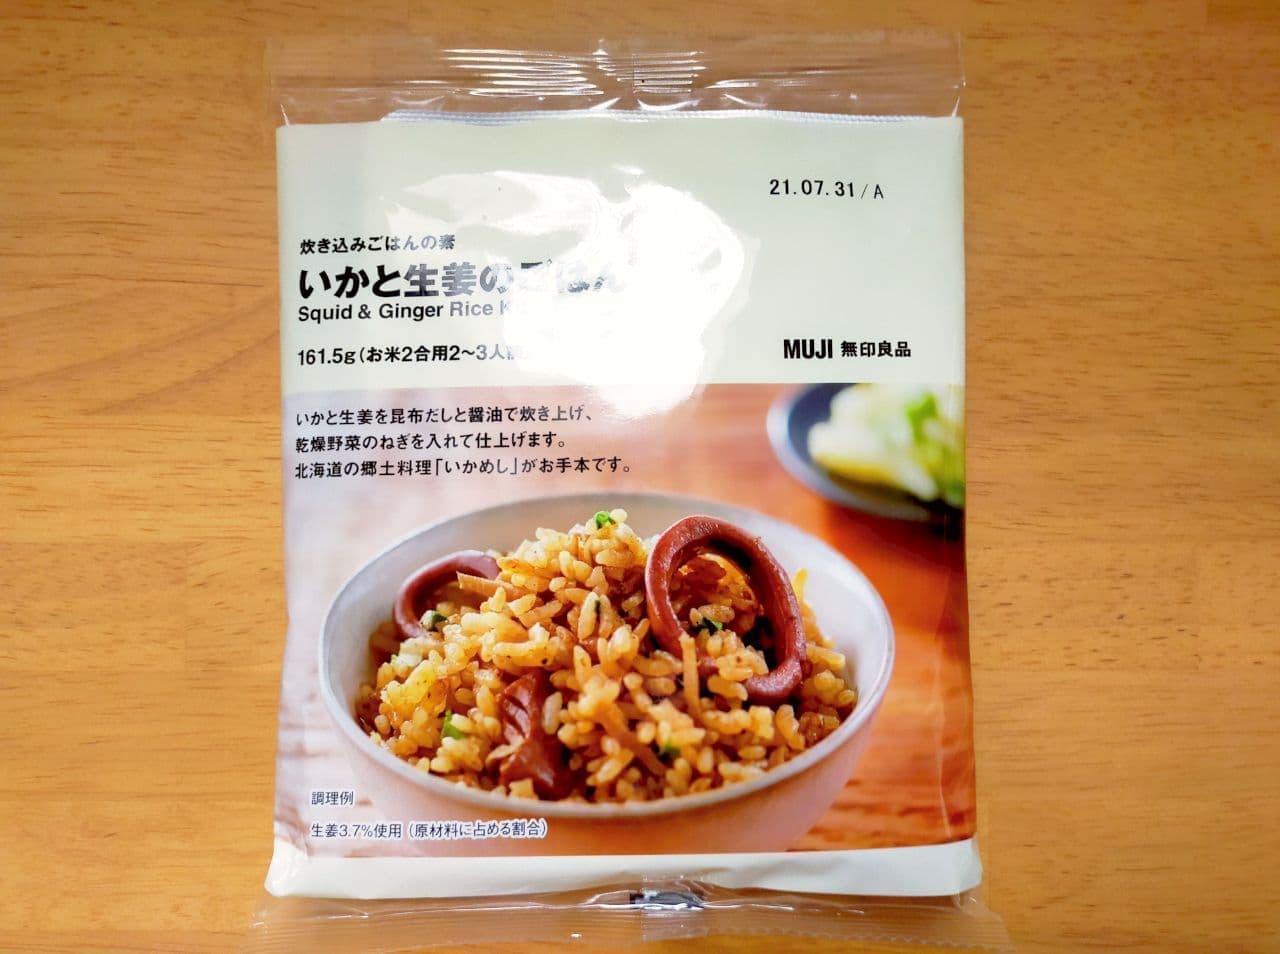 MUJI "Cooked rice base squid and ginger rice"